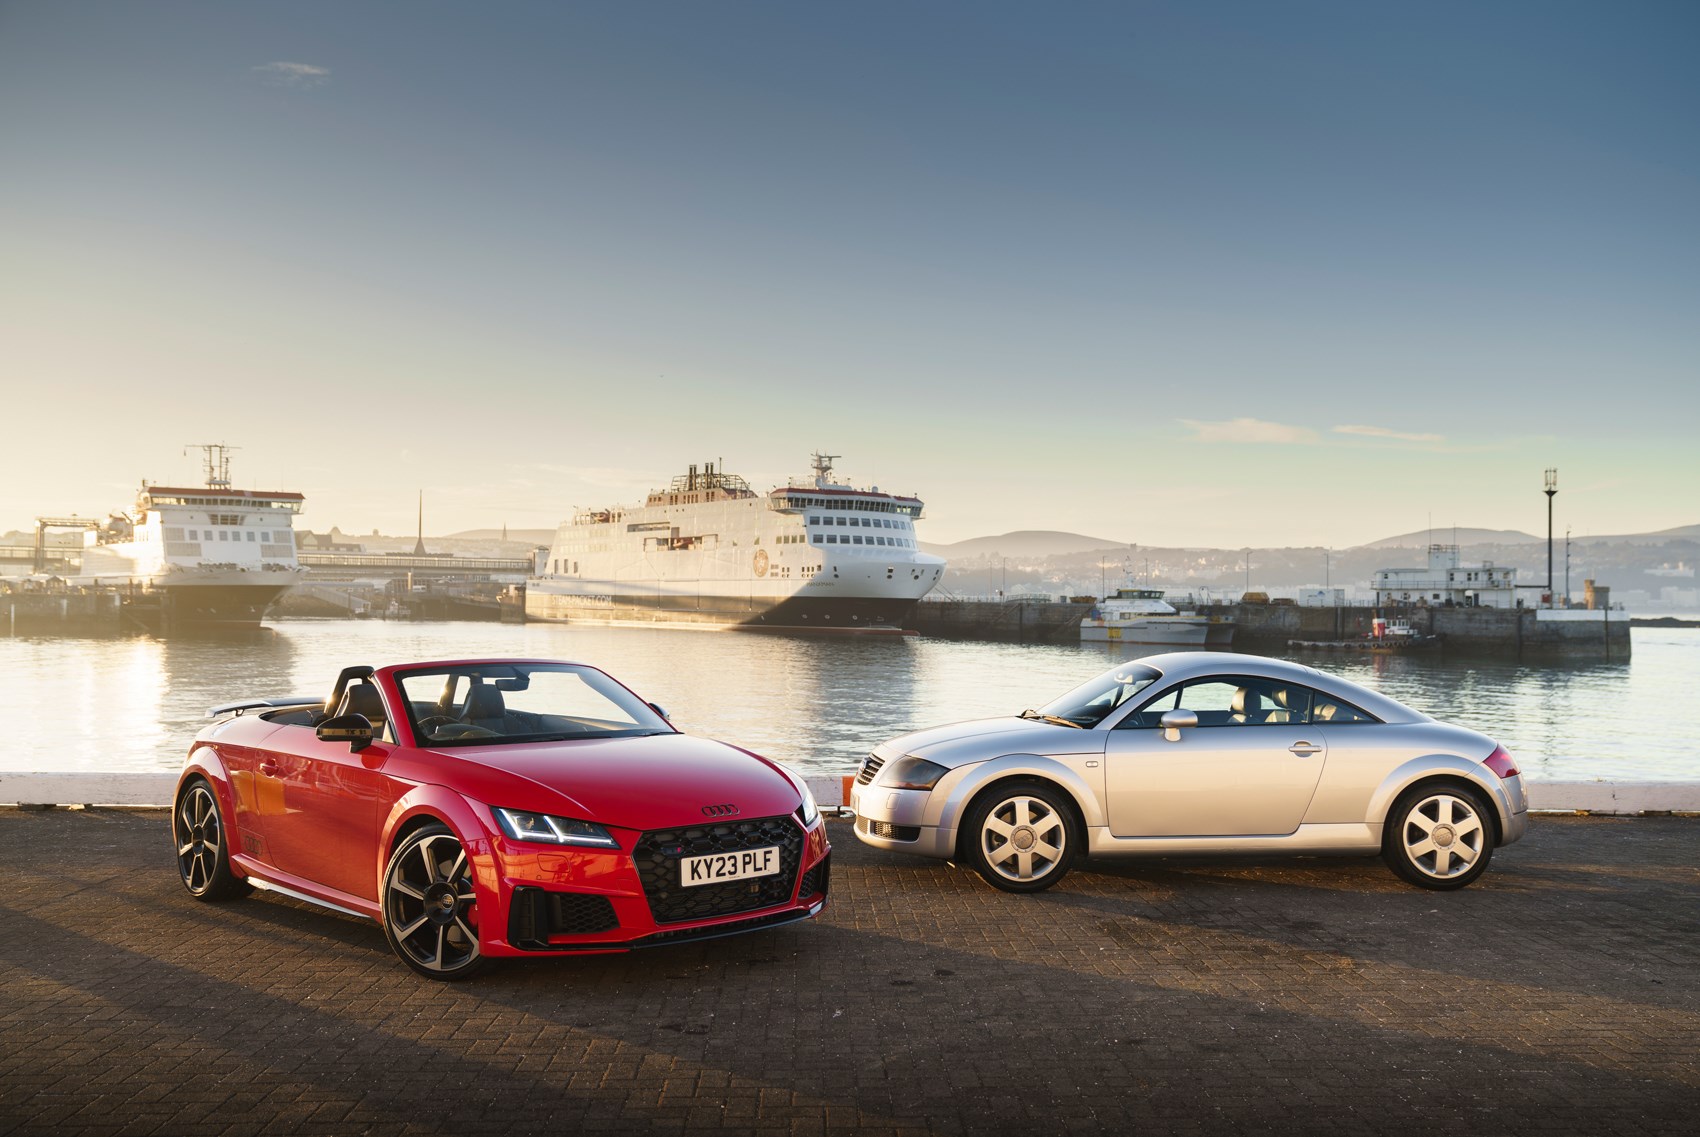 TT at 25: Audi's iconic sports car bows out